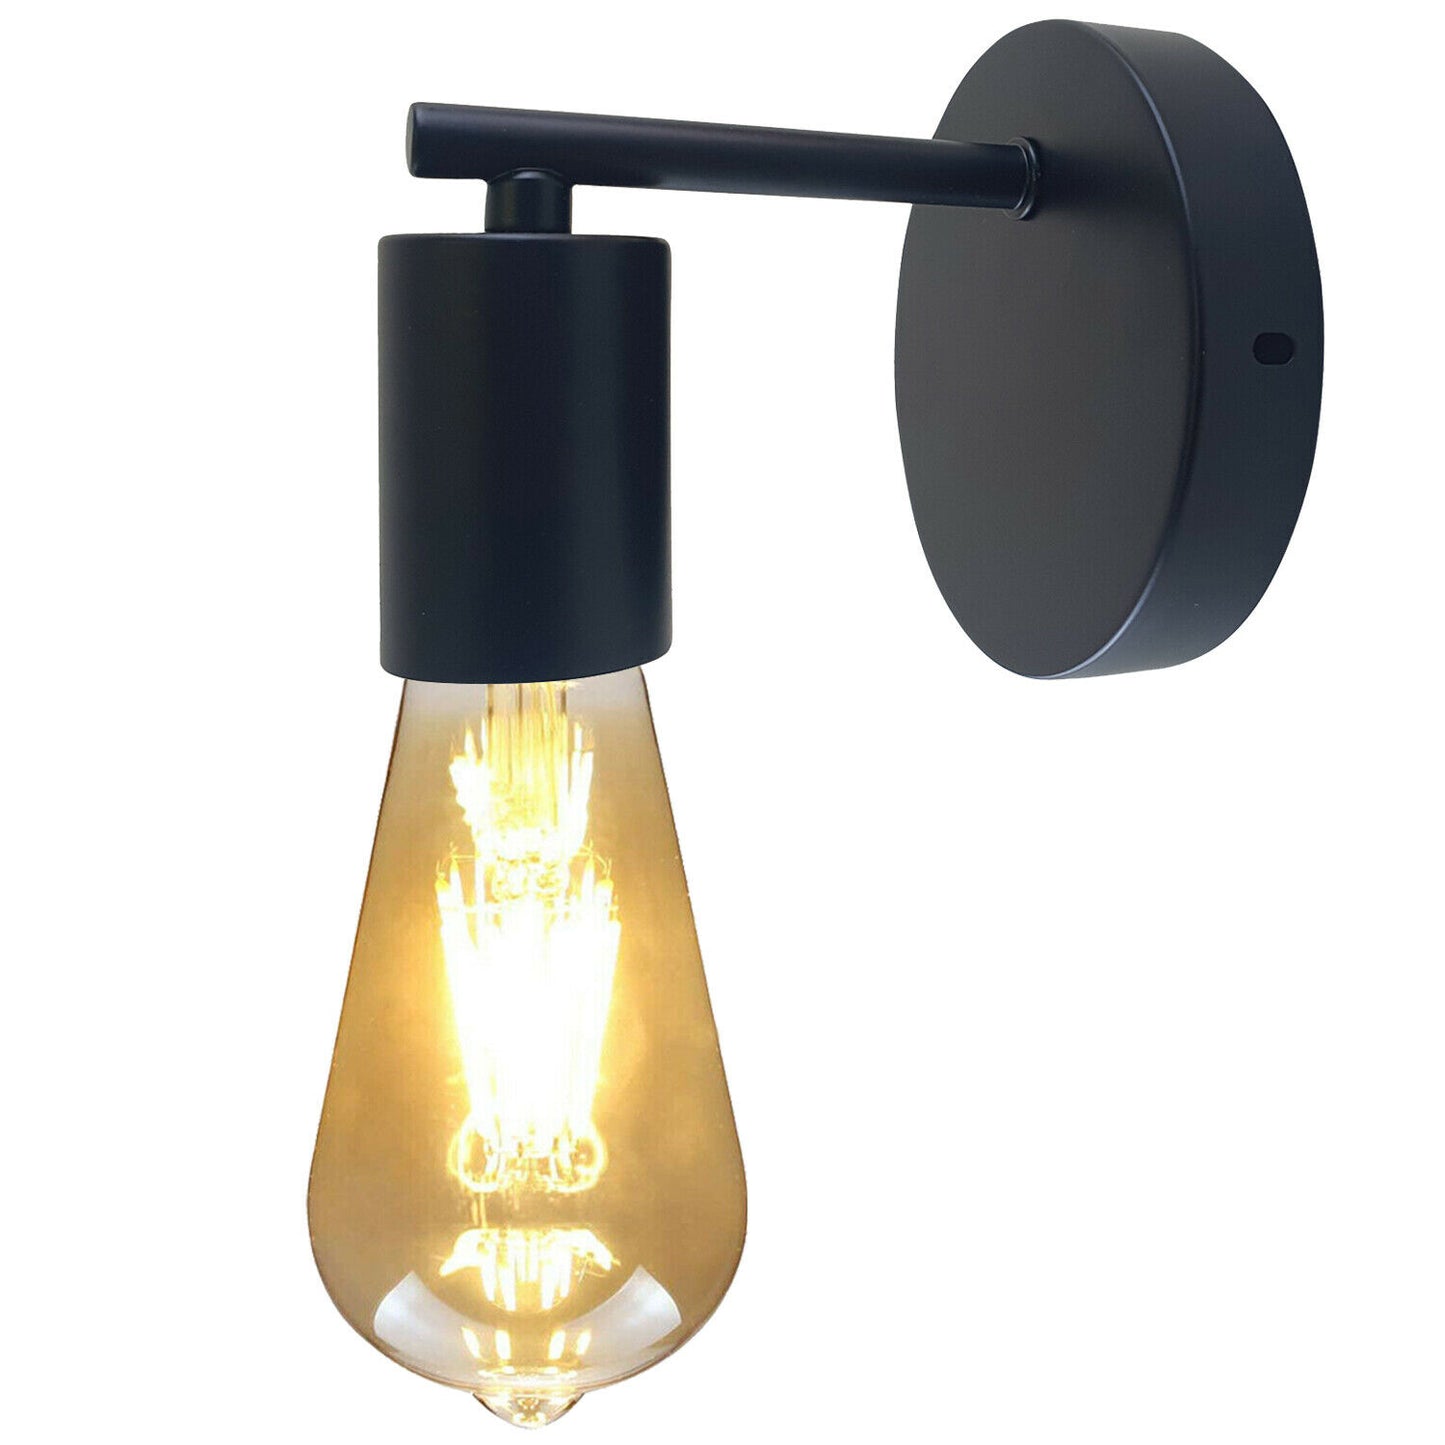 Modern Vintage Retro Industrial Rustic Wall Sconce Light